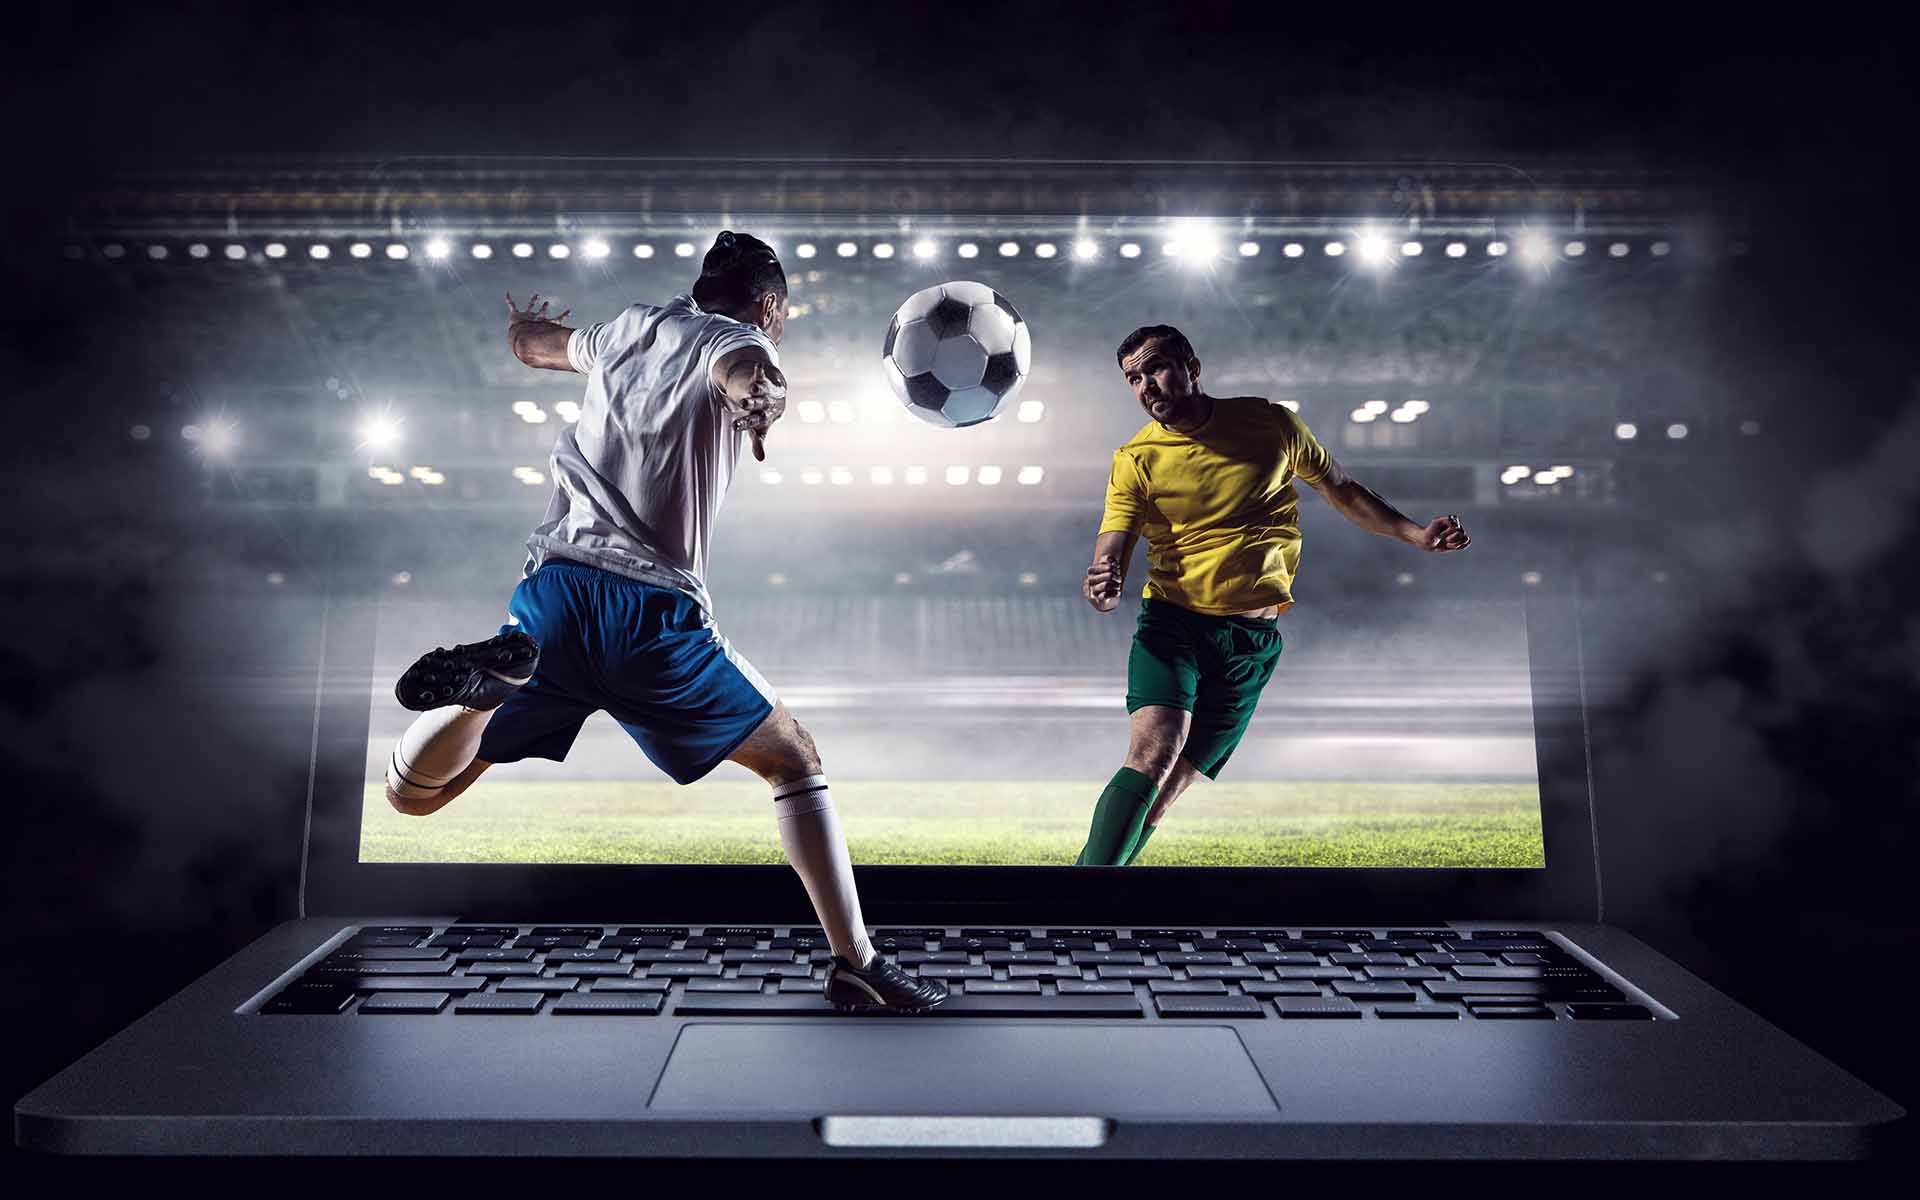 What Every sports betting Thailand Need To Know About Facebook